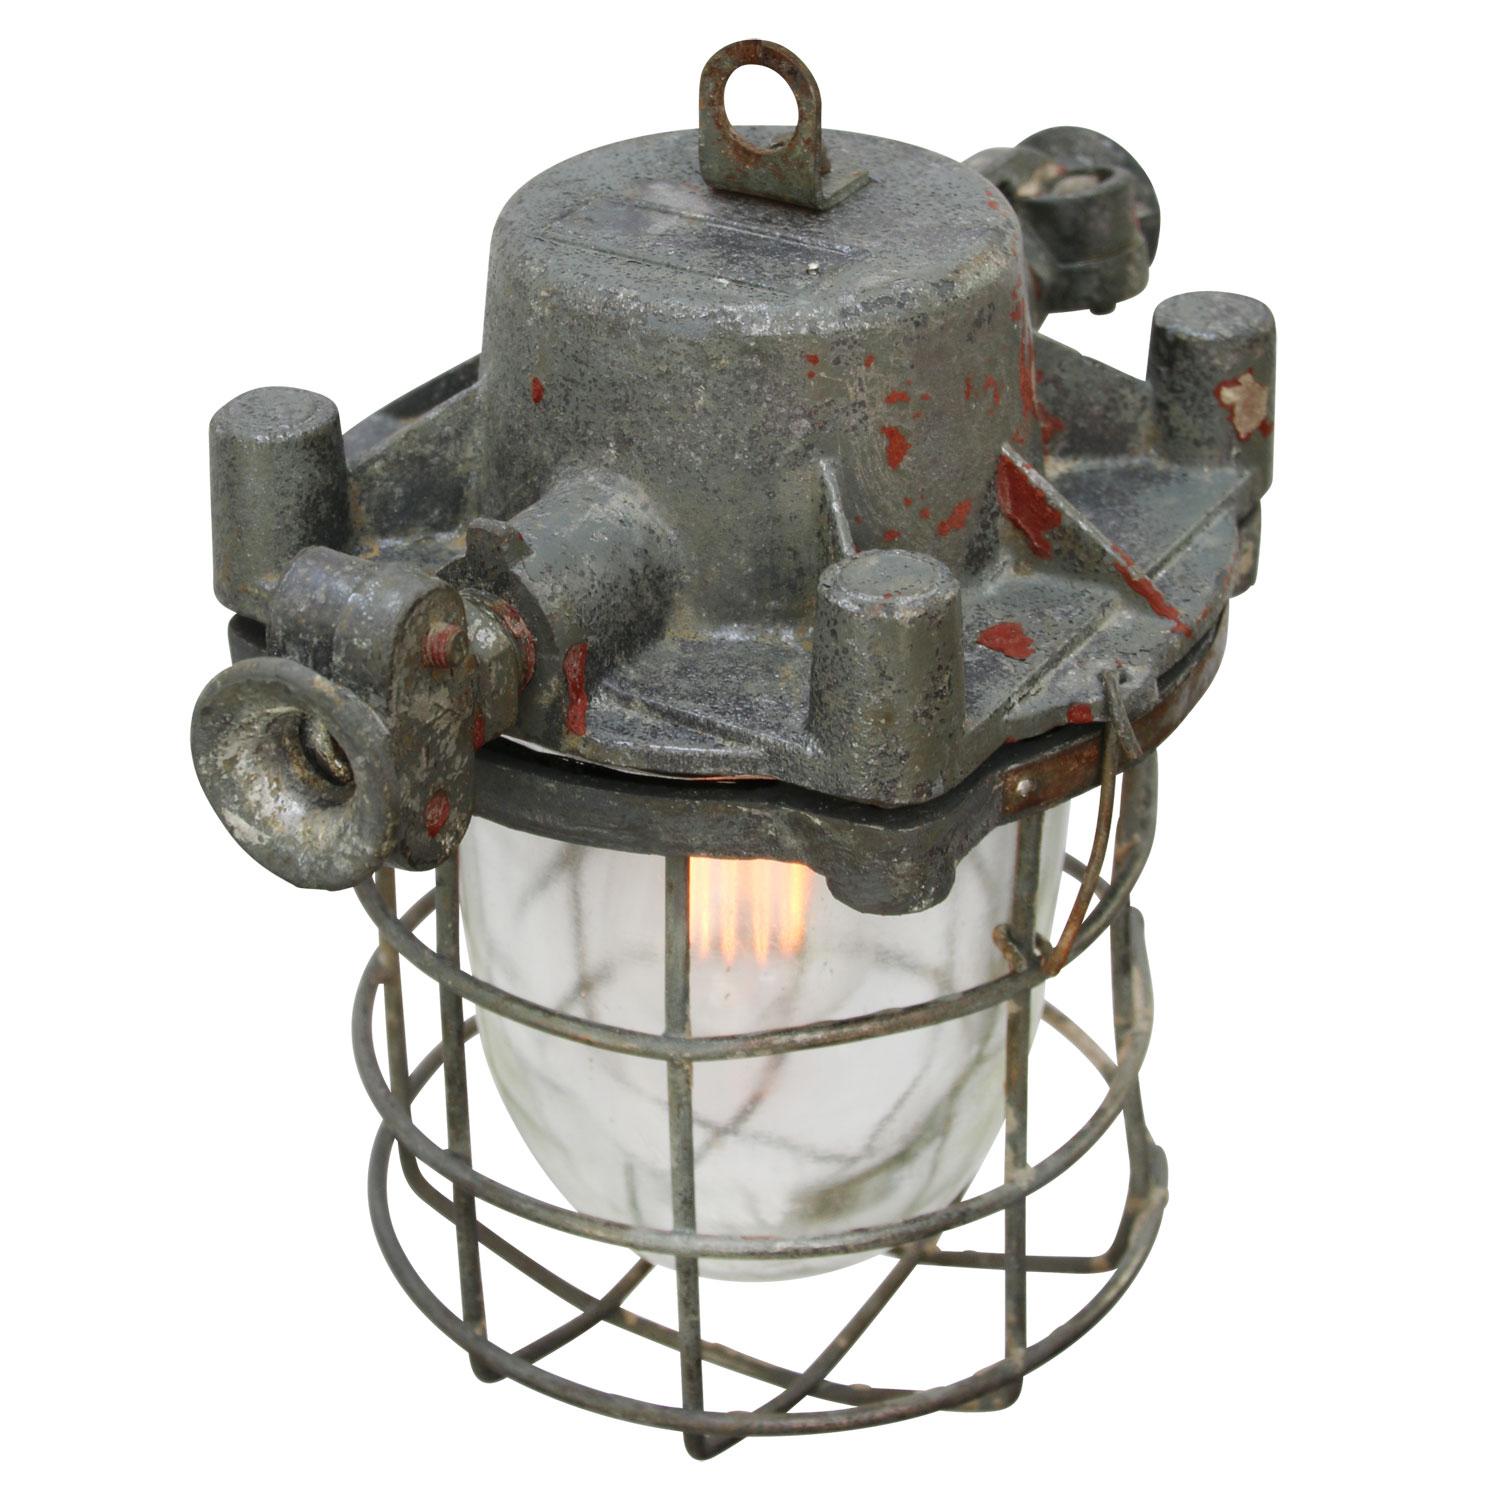 Vintage European industrial hanging lamp.
Cast aluminum with clear glass. 

Weight 5.4 kg / 11.9 lb

Priced per individual item. All lamps have been made suitable by international standards for incandescent light bulbs, energy-efficient and LED